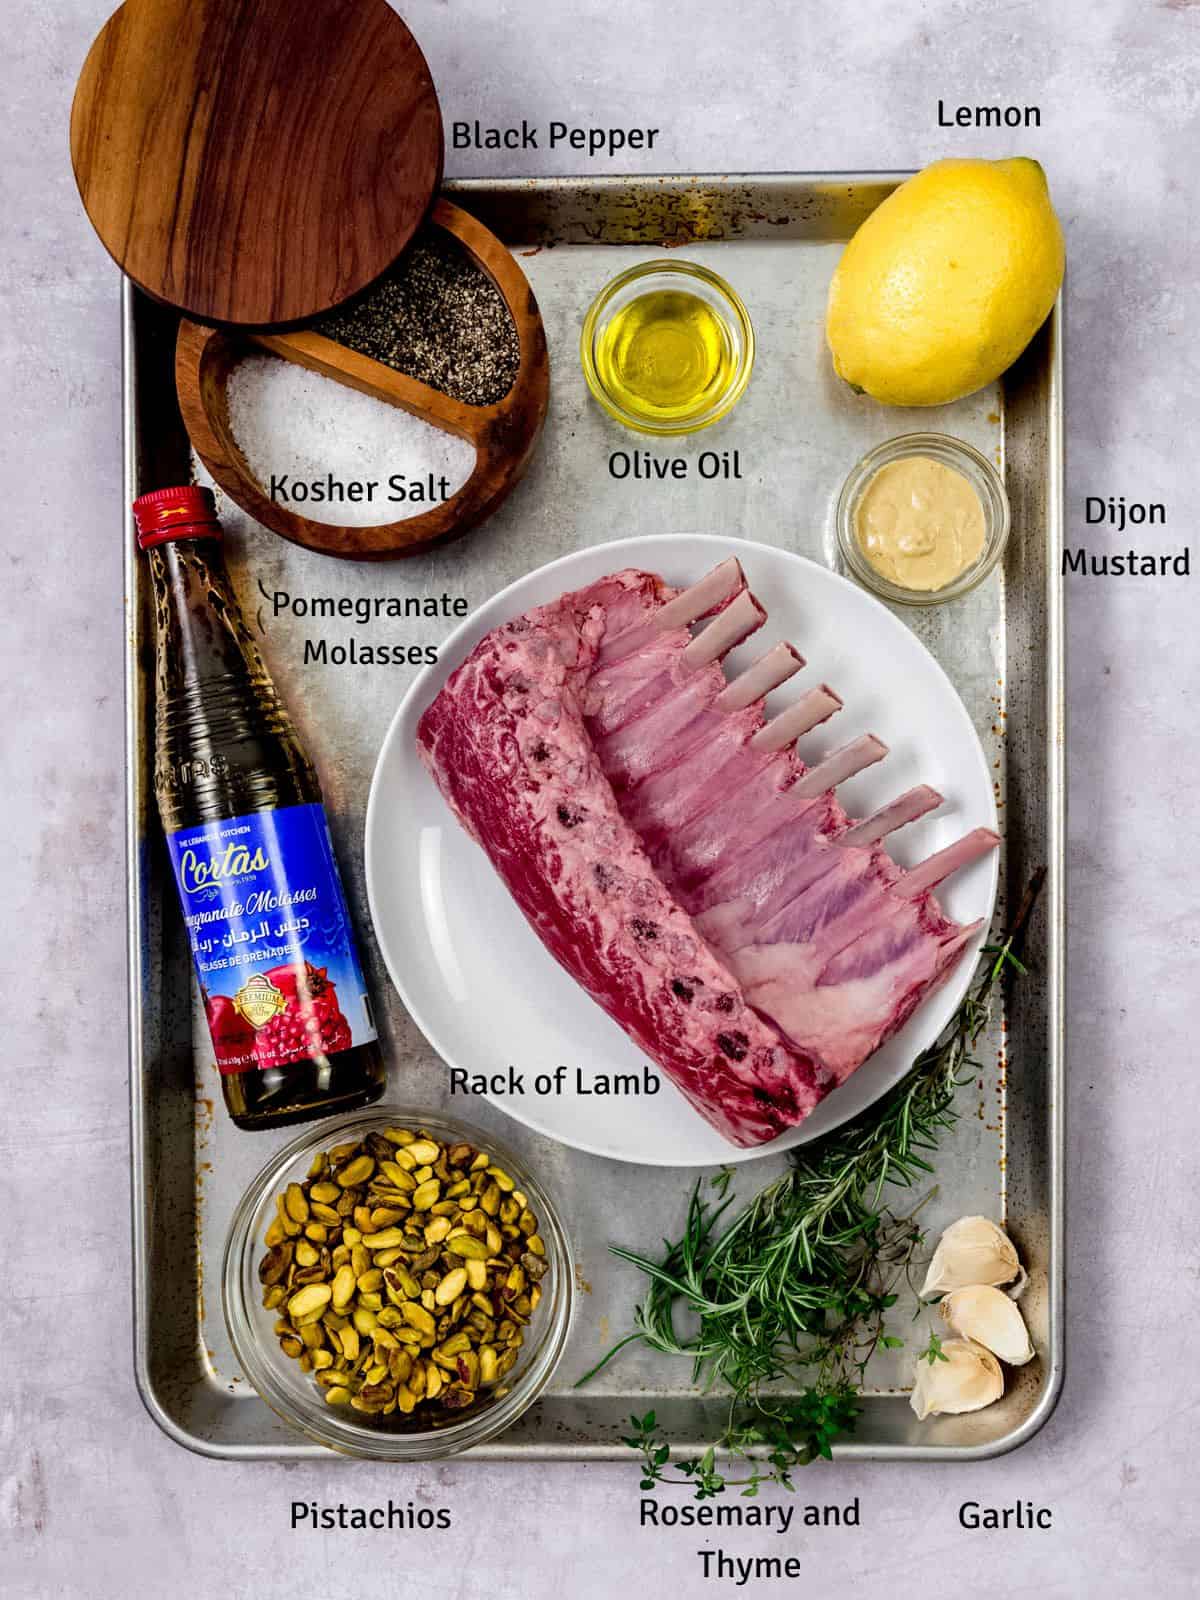 Ingredients for pistachio crusted lamb, including fresh herbs and lemon.